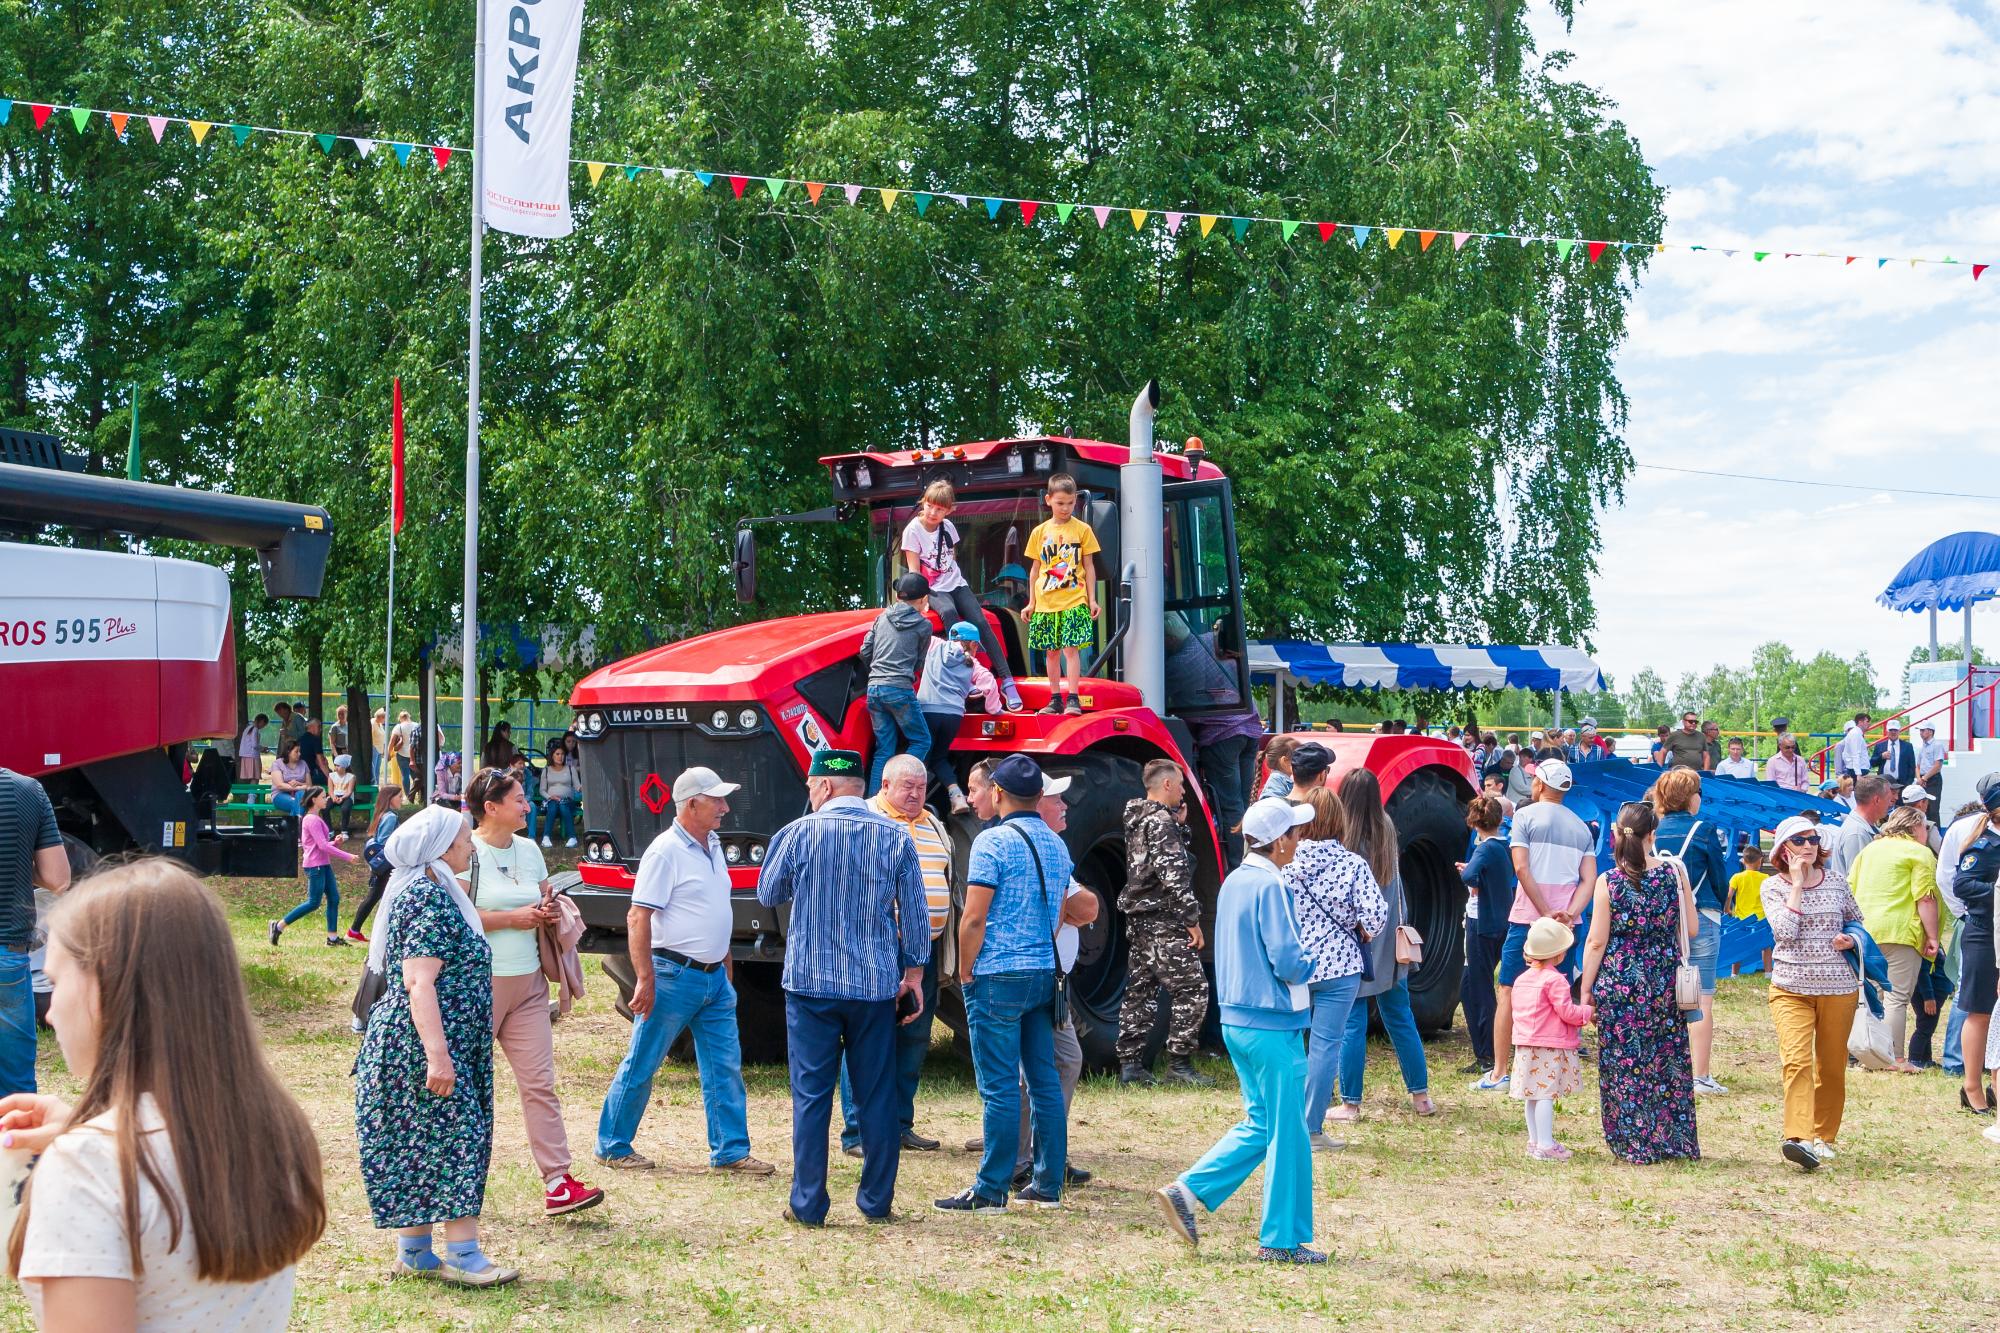 People looking around an outdoor farm machinery event